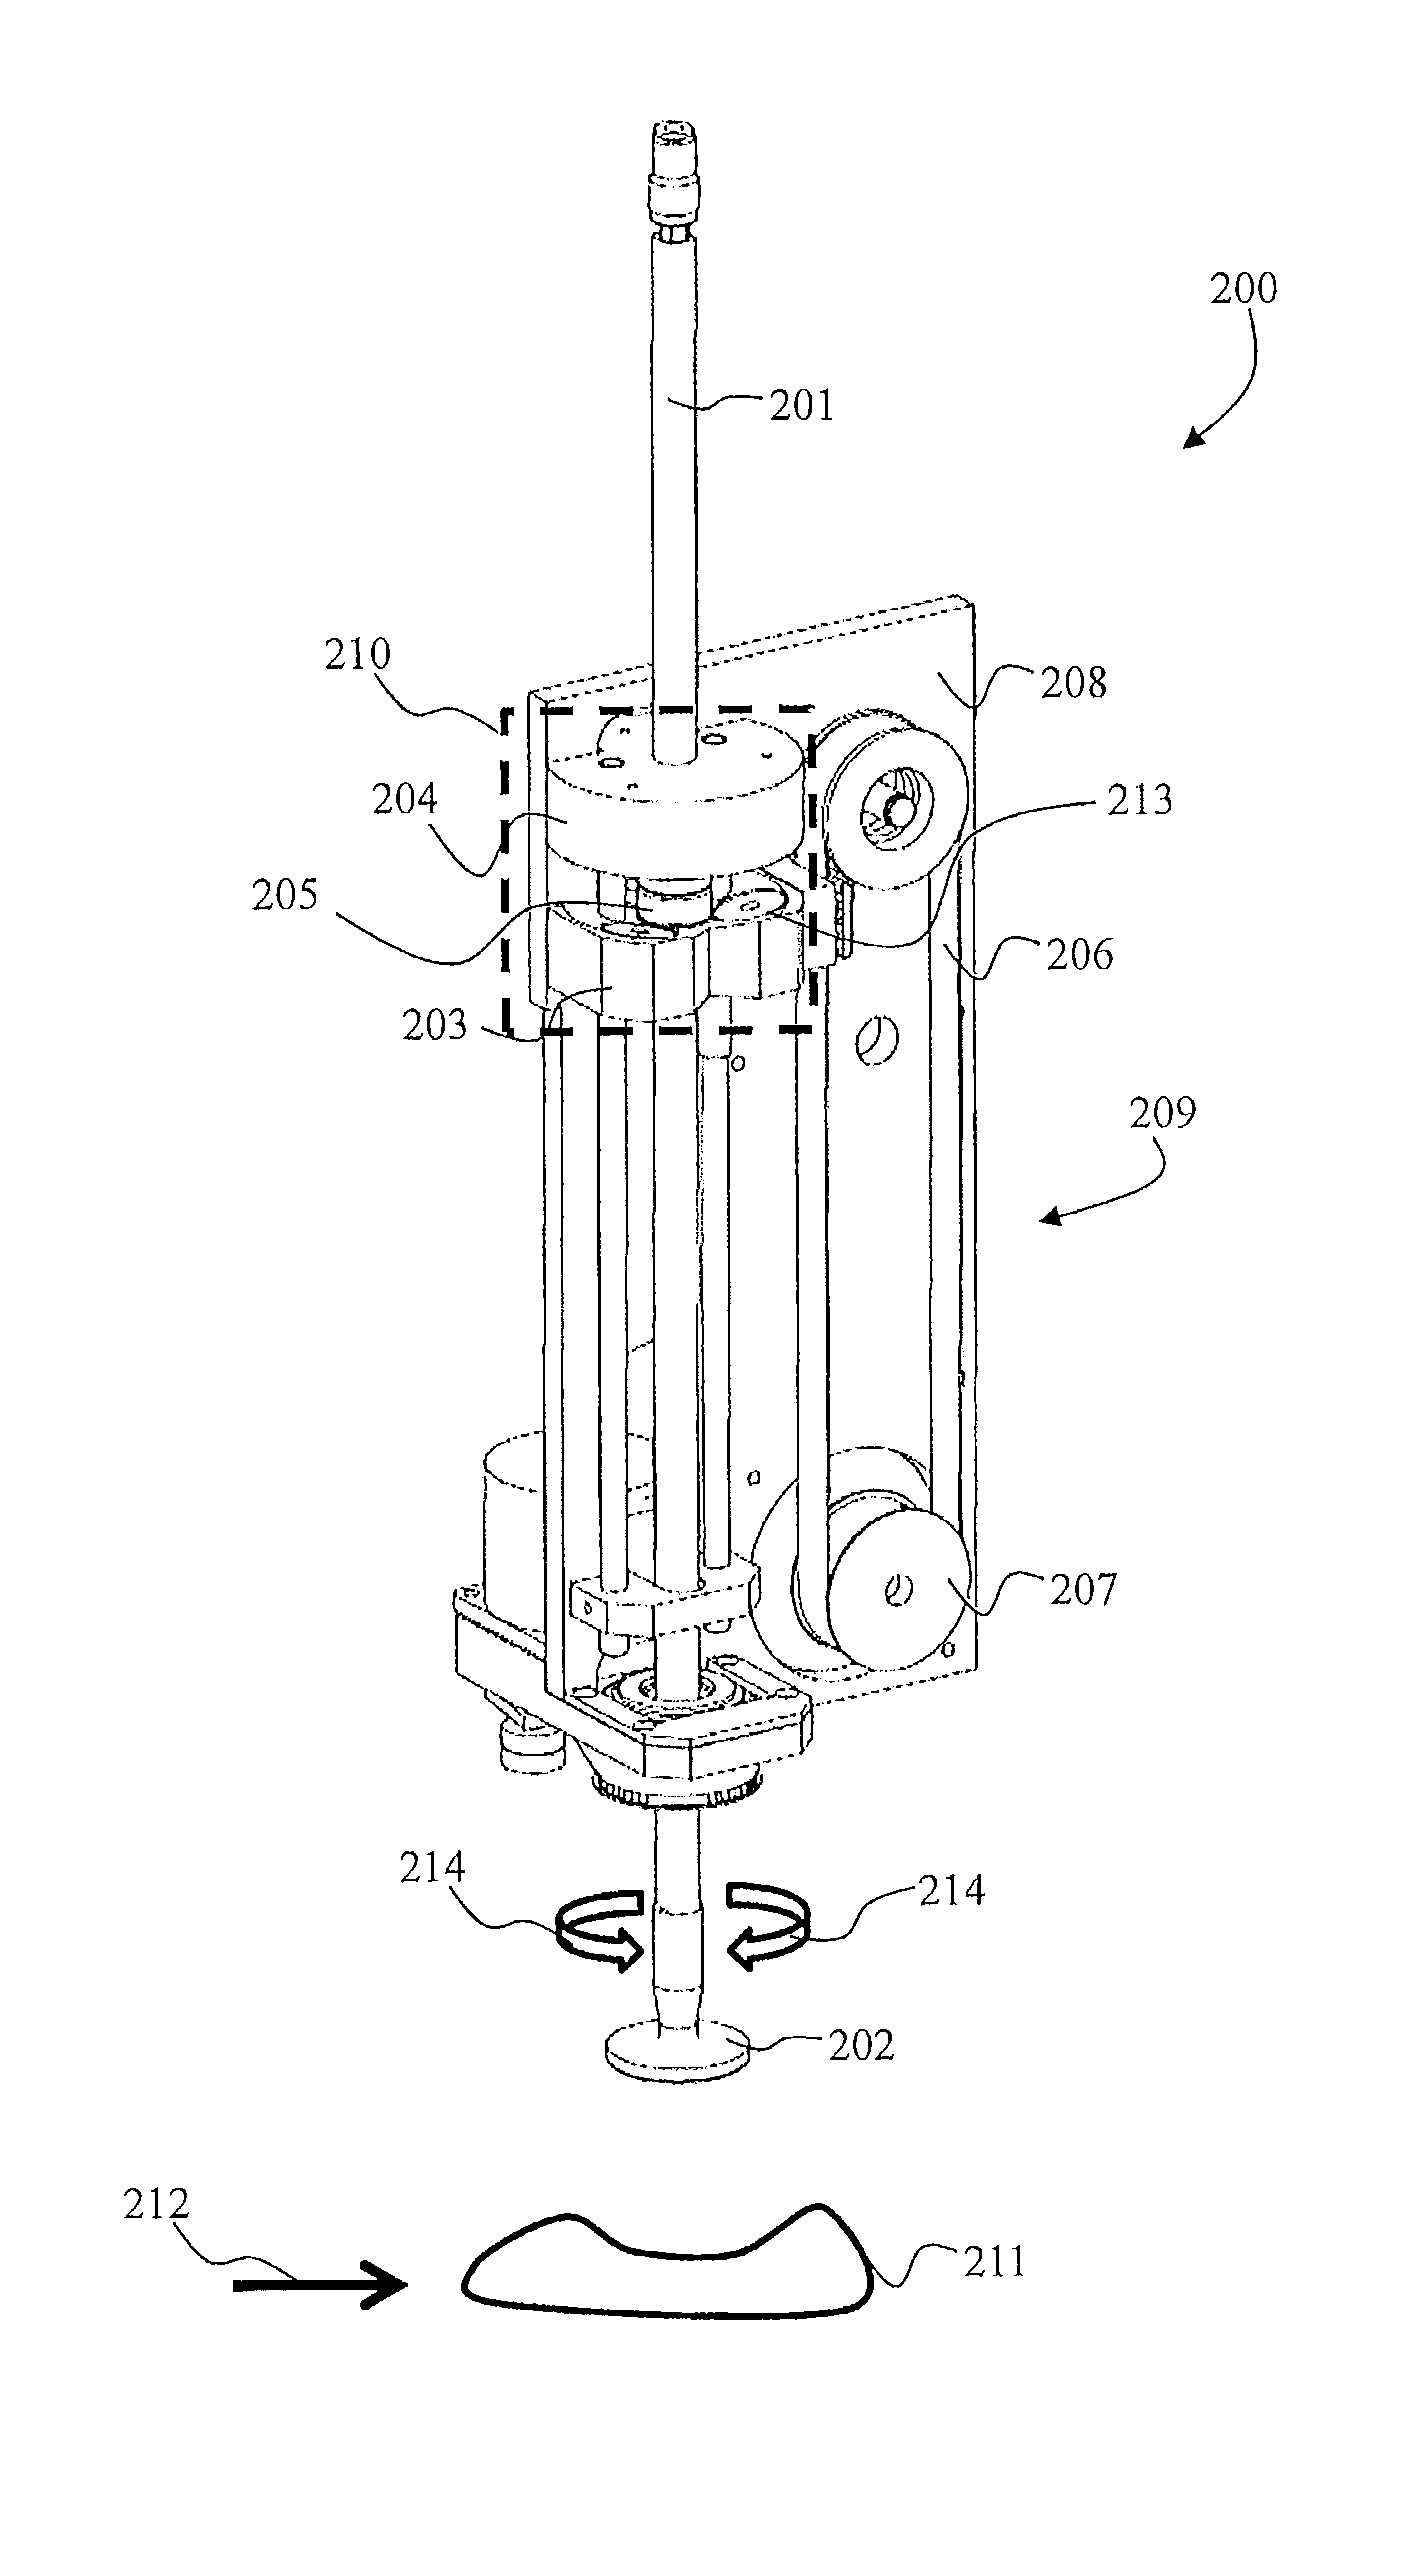 Labeling device for labeling objects, in particular moving objects